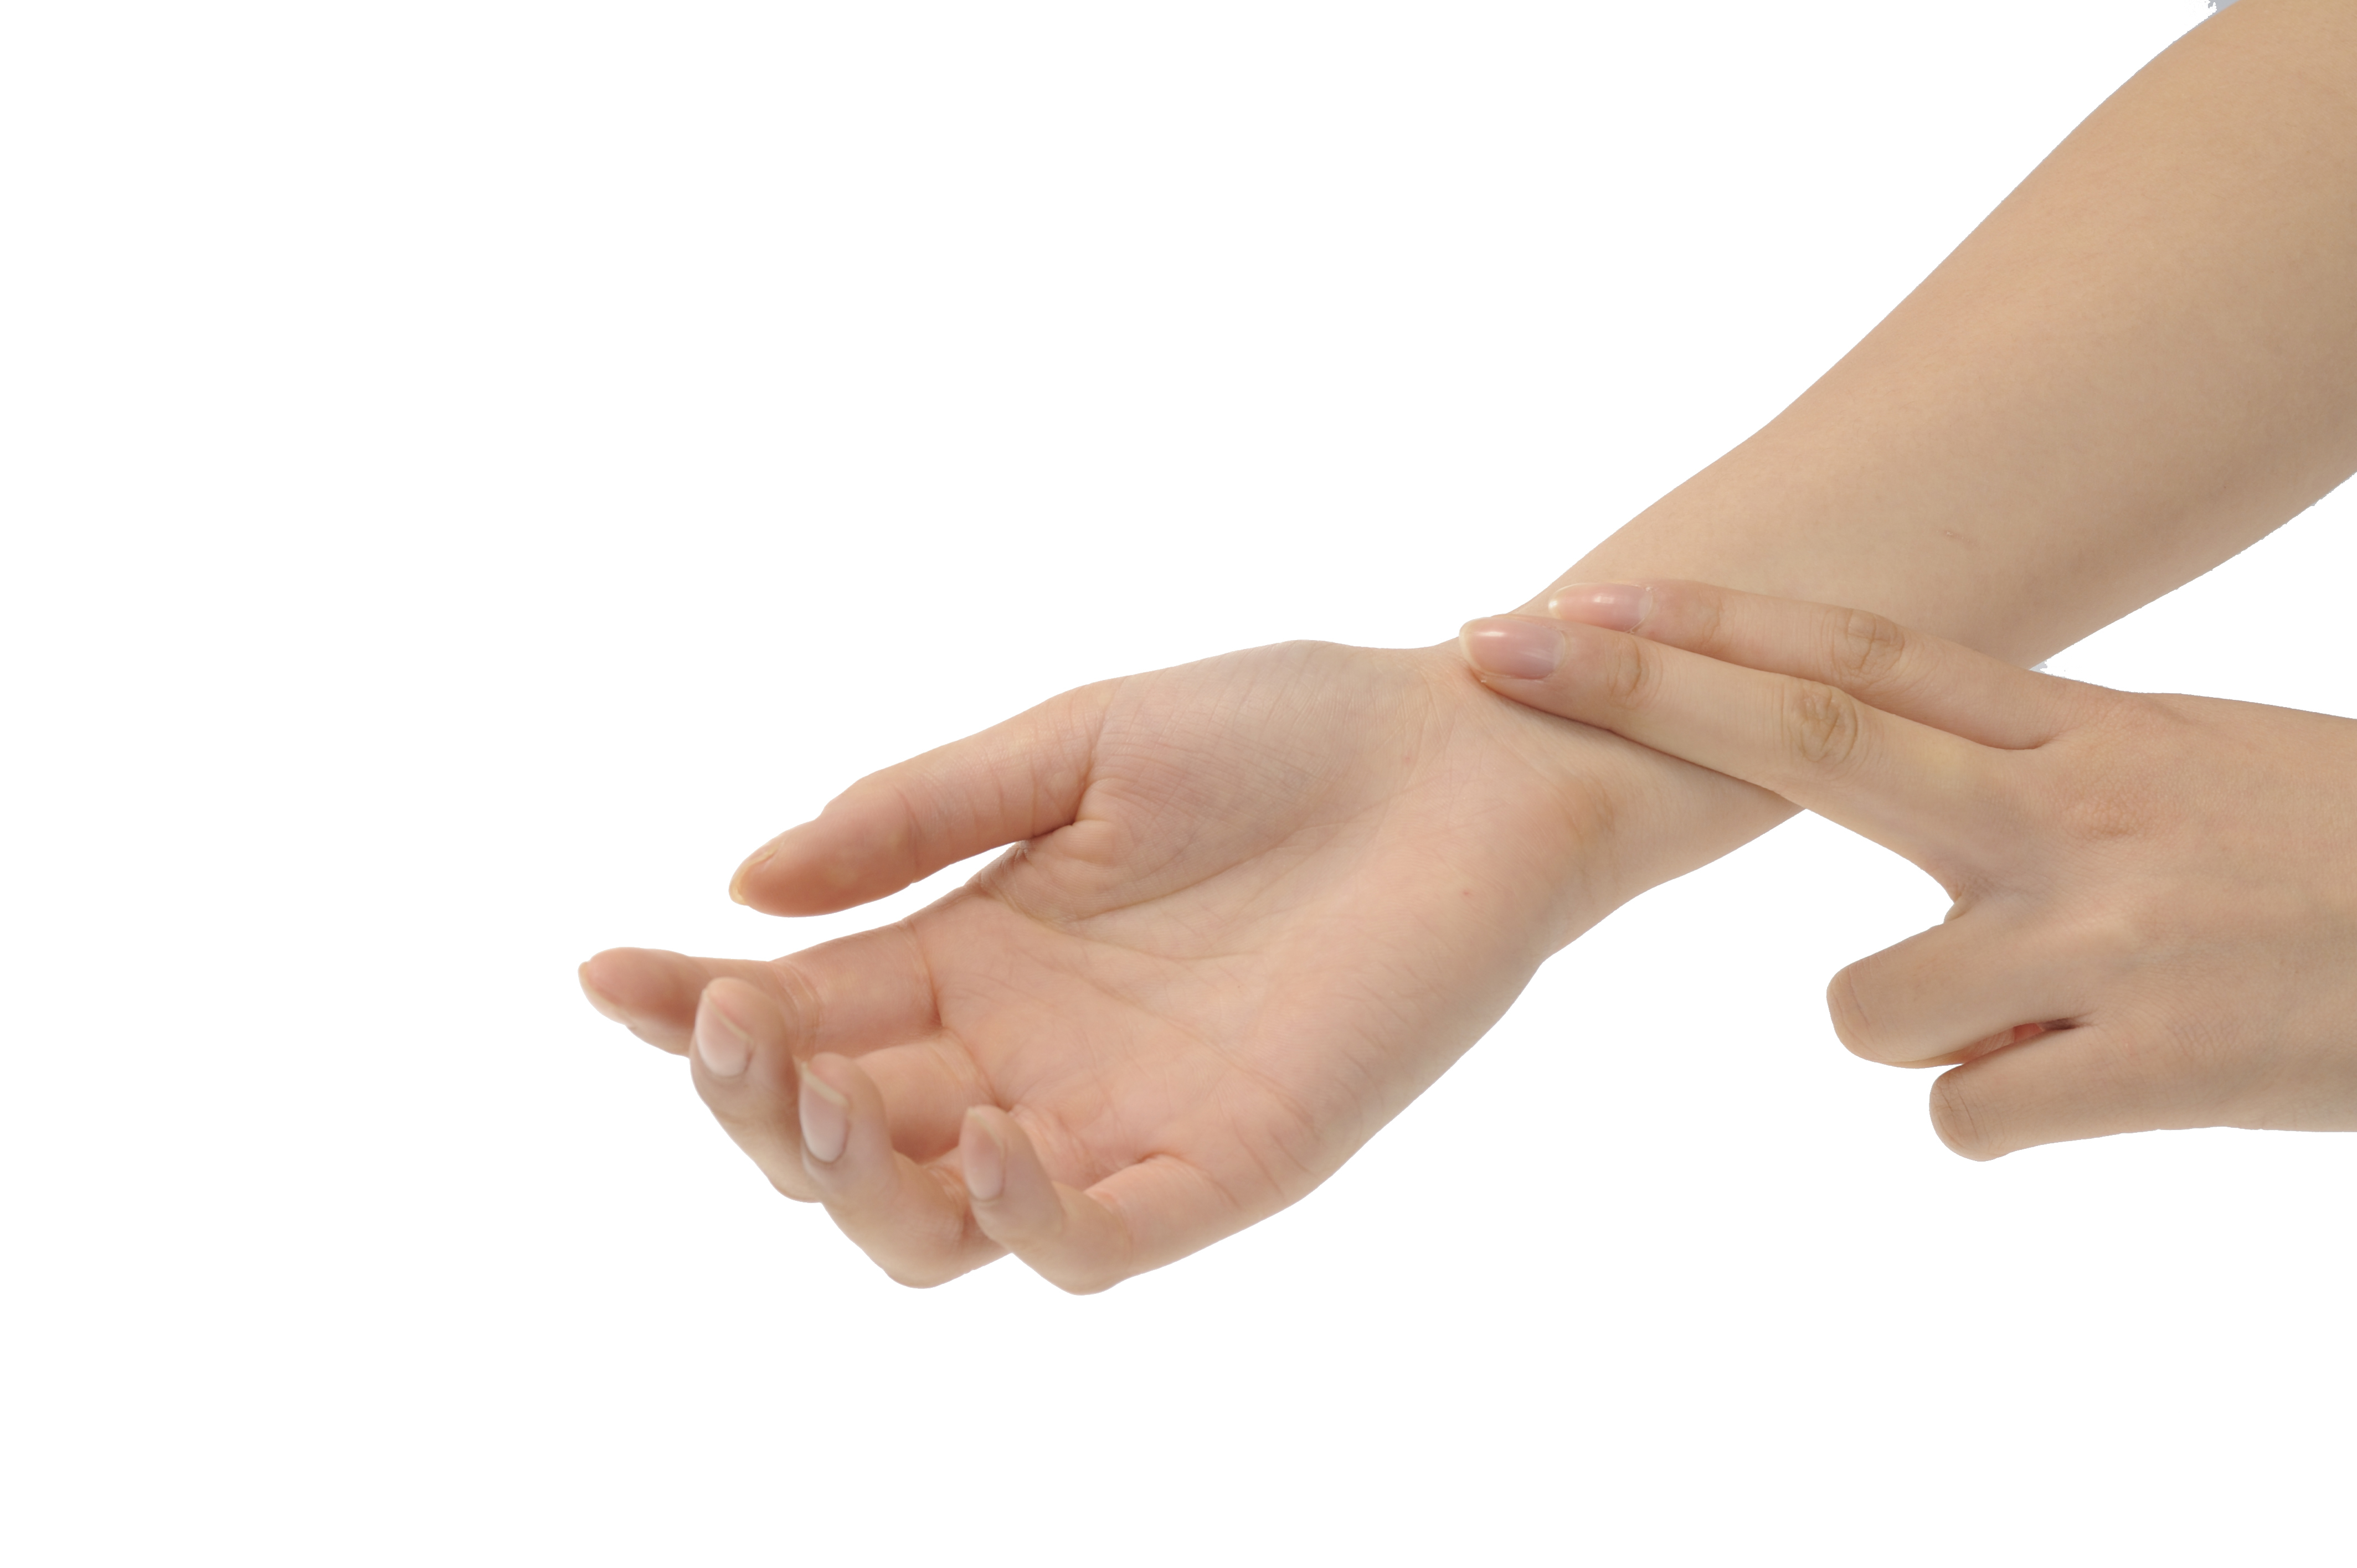 A photo shows a finger feeling the pulse rate in the wrist and a pop-up states, “You can find your pulse on the inside of your wrist, just below your thumb. You will not be able to see the artery below the skin, but if you press lightly, you will feel a steady pulse there. If you can’t feel a steady beat, search the area with your finger until you find it. Press your first and middle finger lightly on this artery and count the beats.”